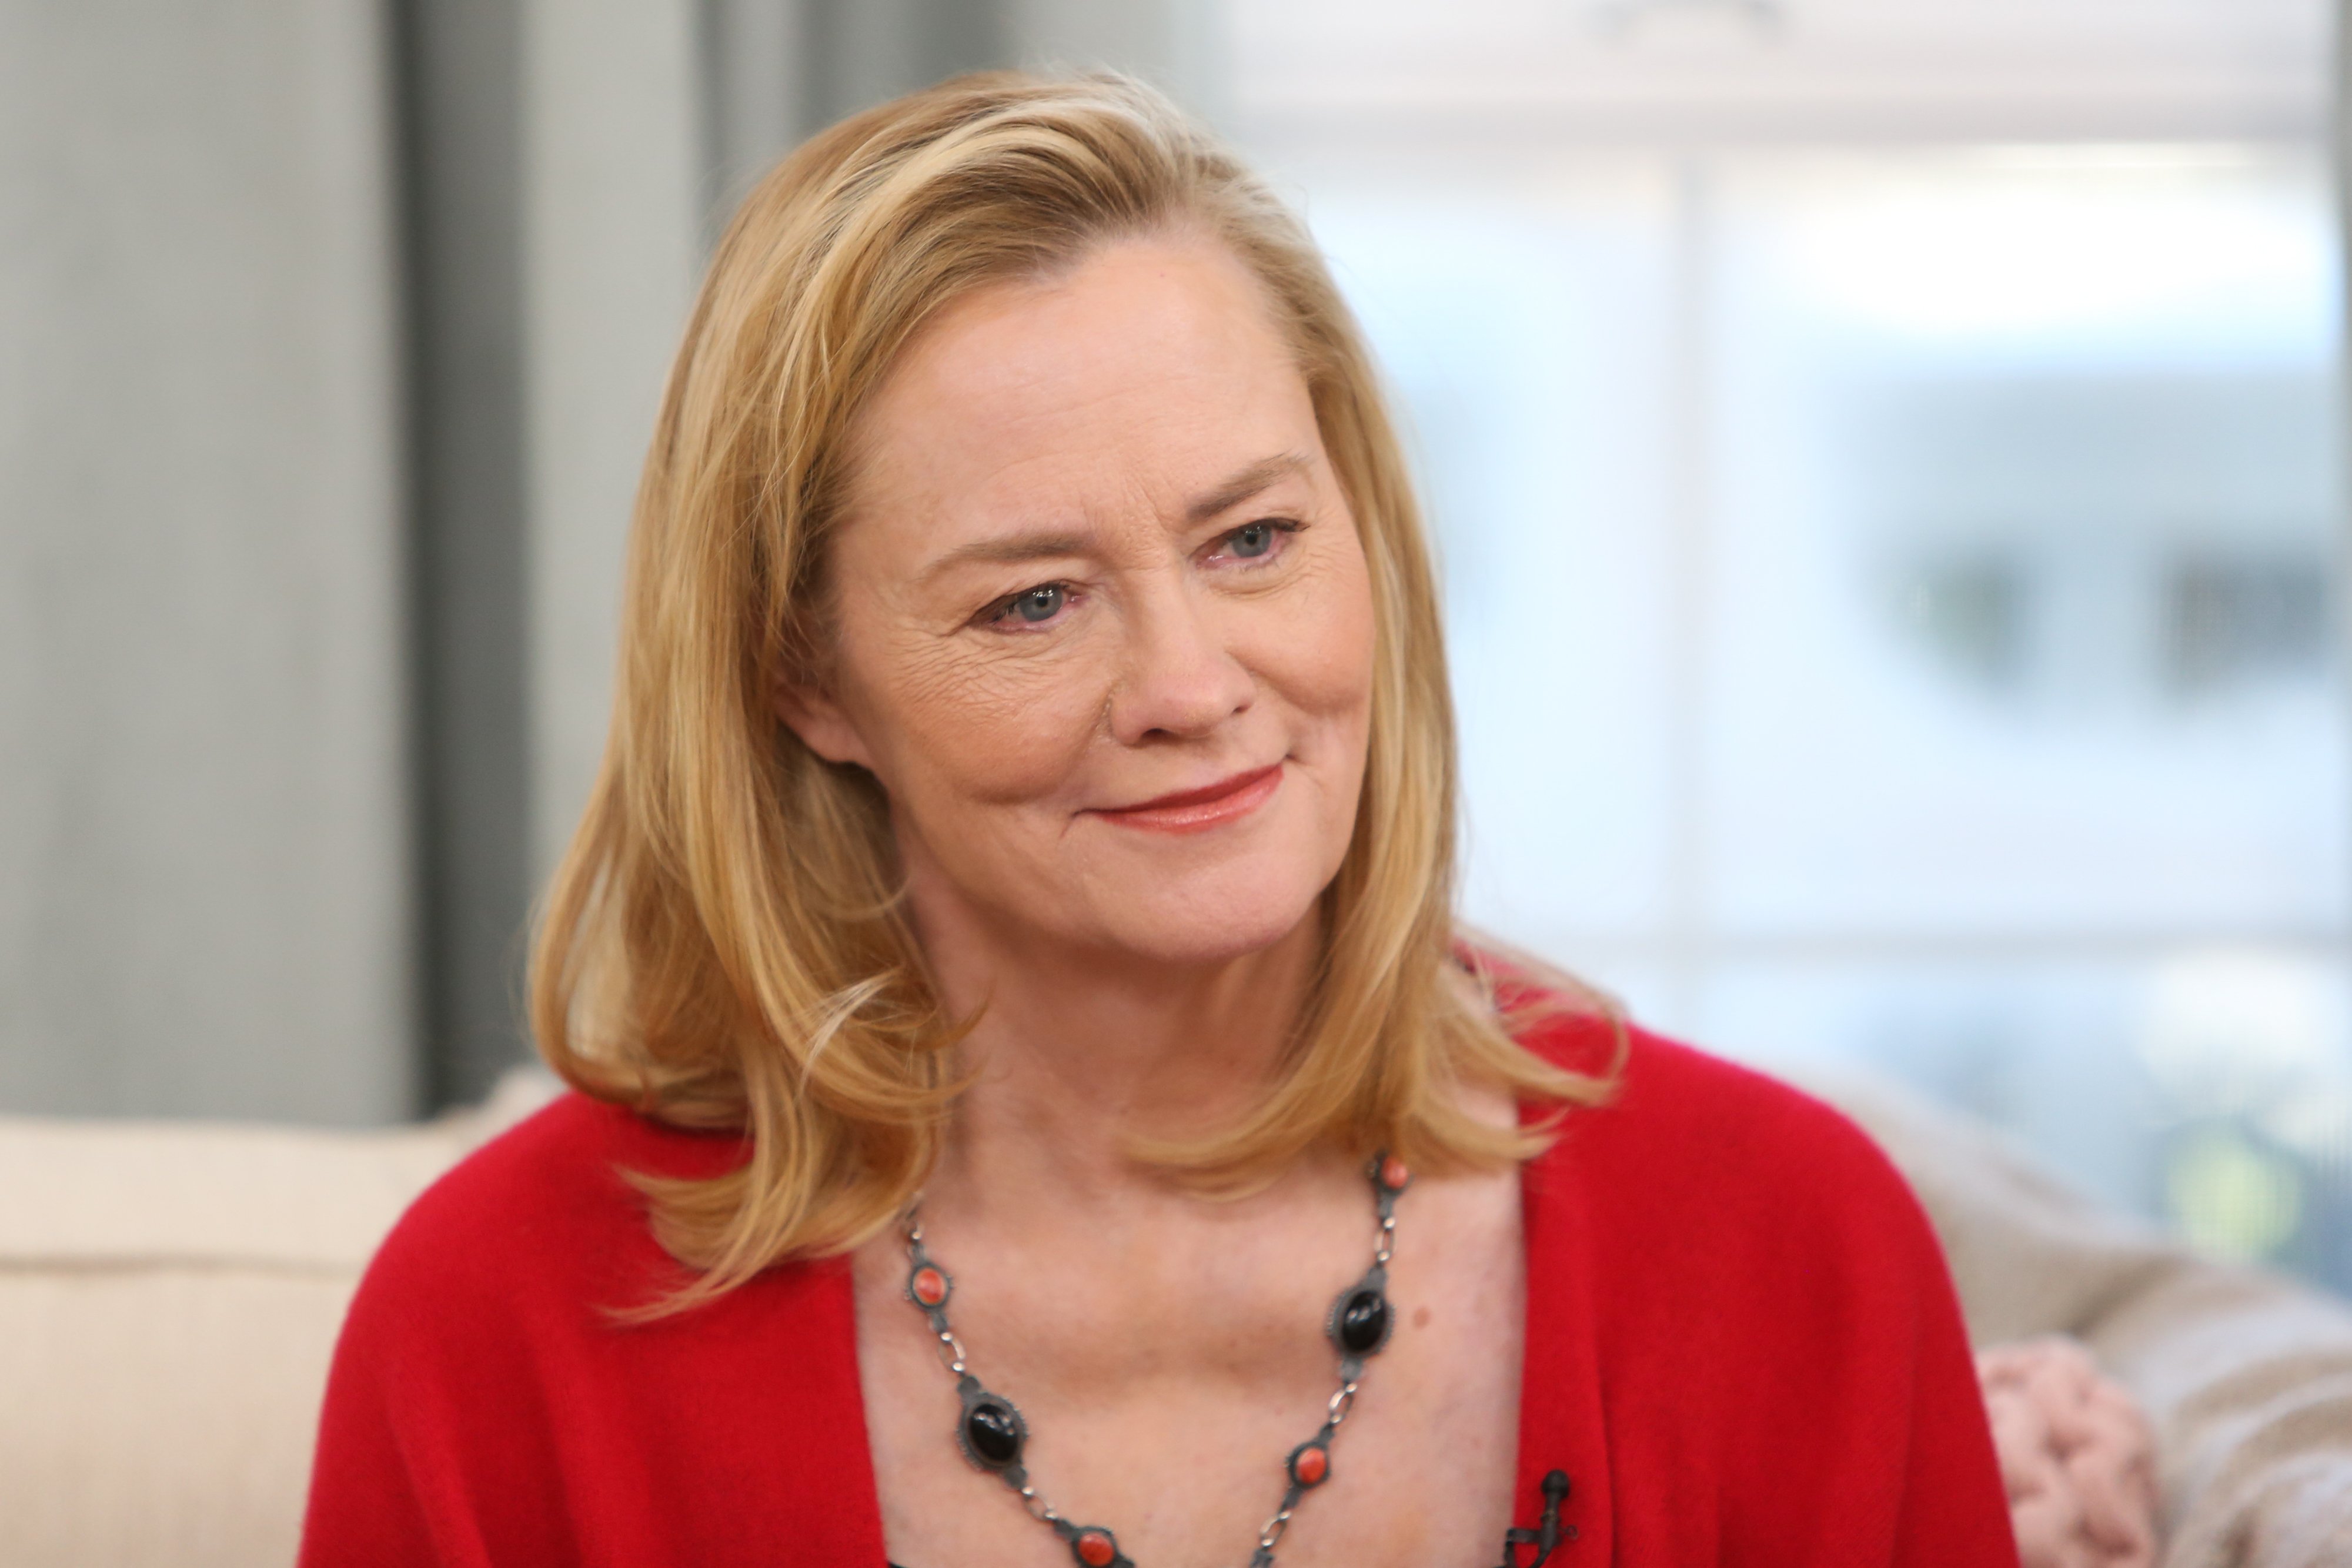  Cybill Shepherd visits Hallmark's "Home & Family" at Universal Studios Hollywood on January 25, 2019  | Photo: GettyImages